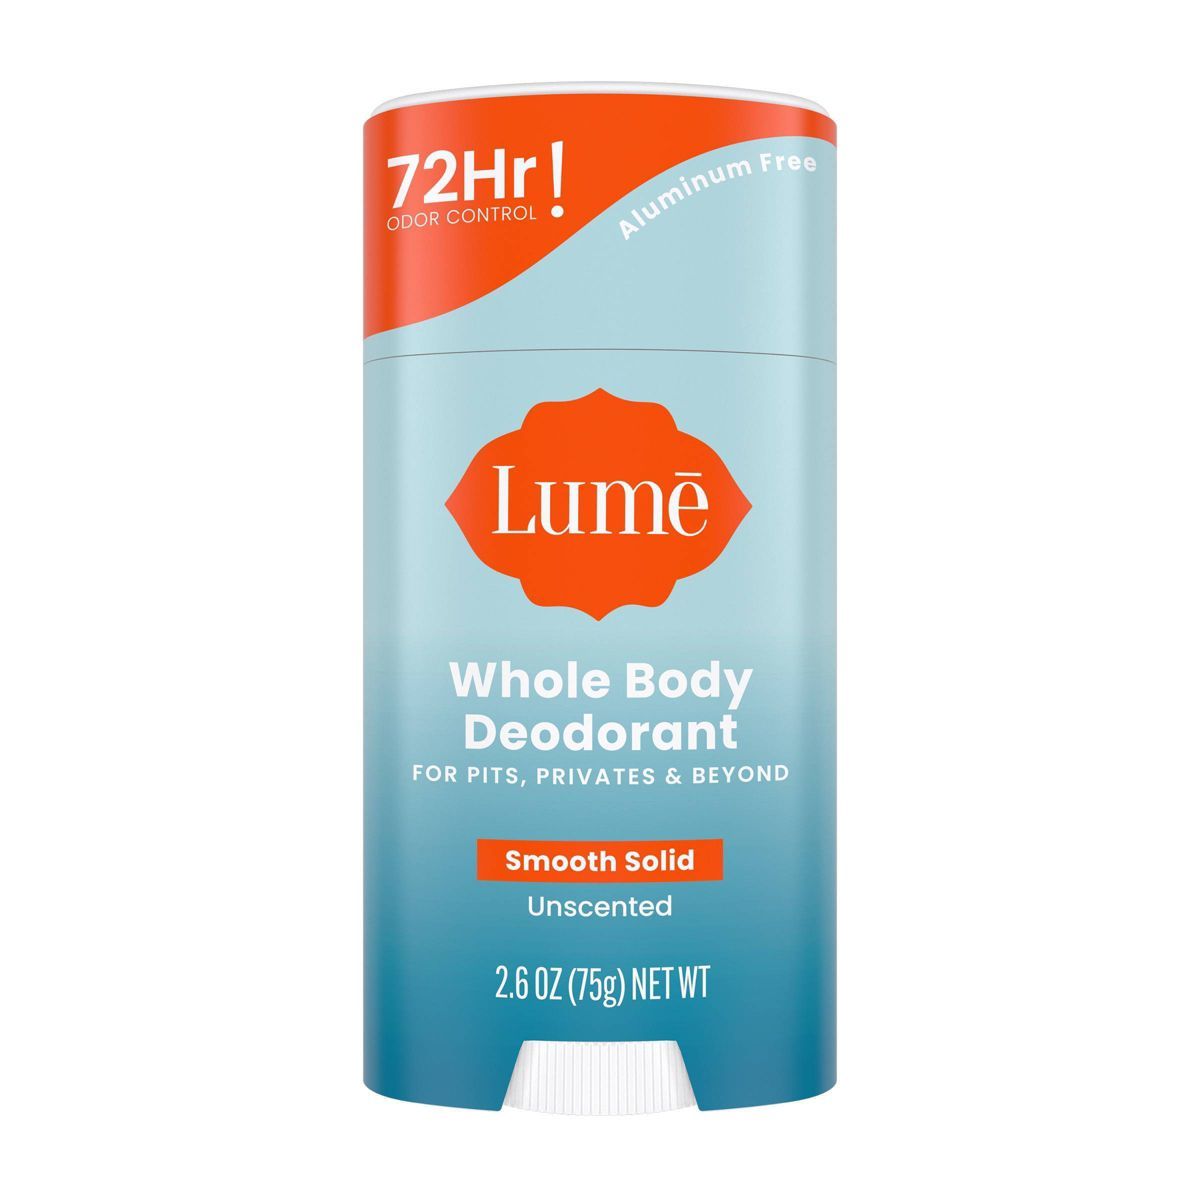 Lume Whole Body Women’s Deodorant - Smooth Solid Stick - Aluminum Free - Unscented - 2.6oz | Target